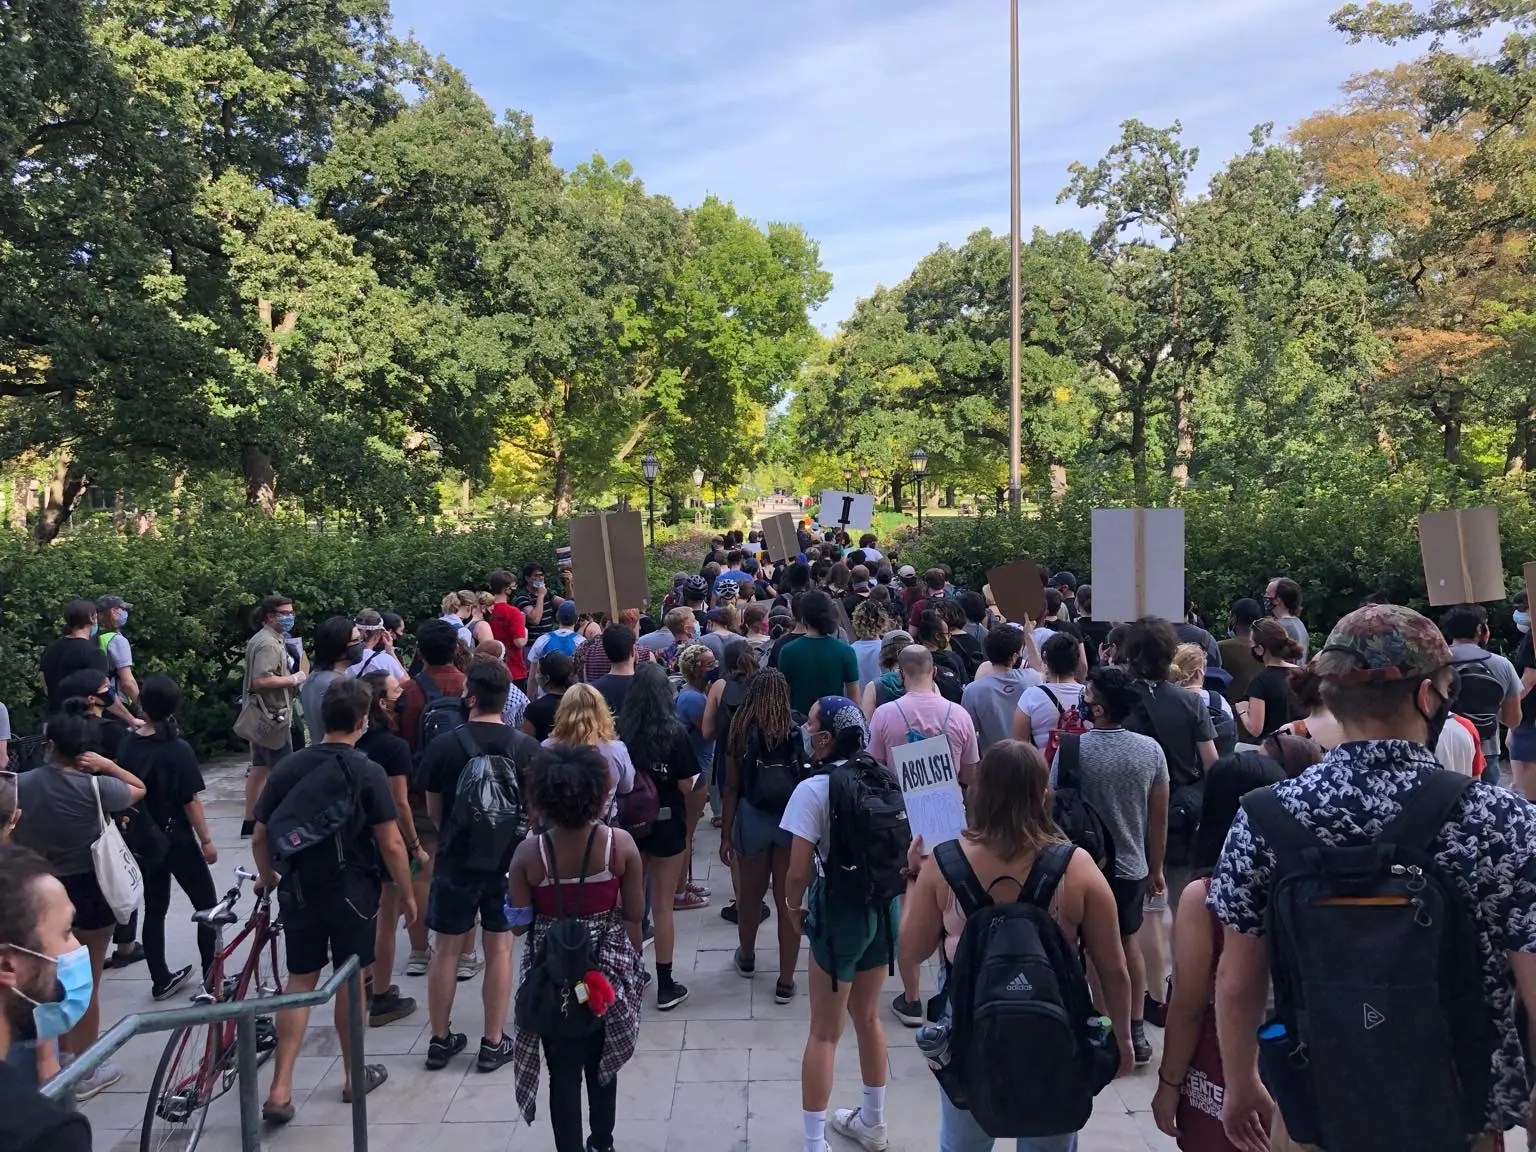 University of Chicago students and community members march across the quad